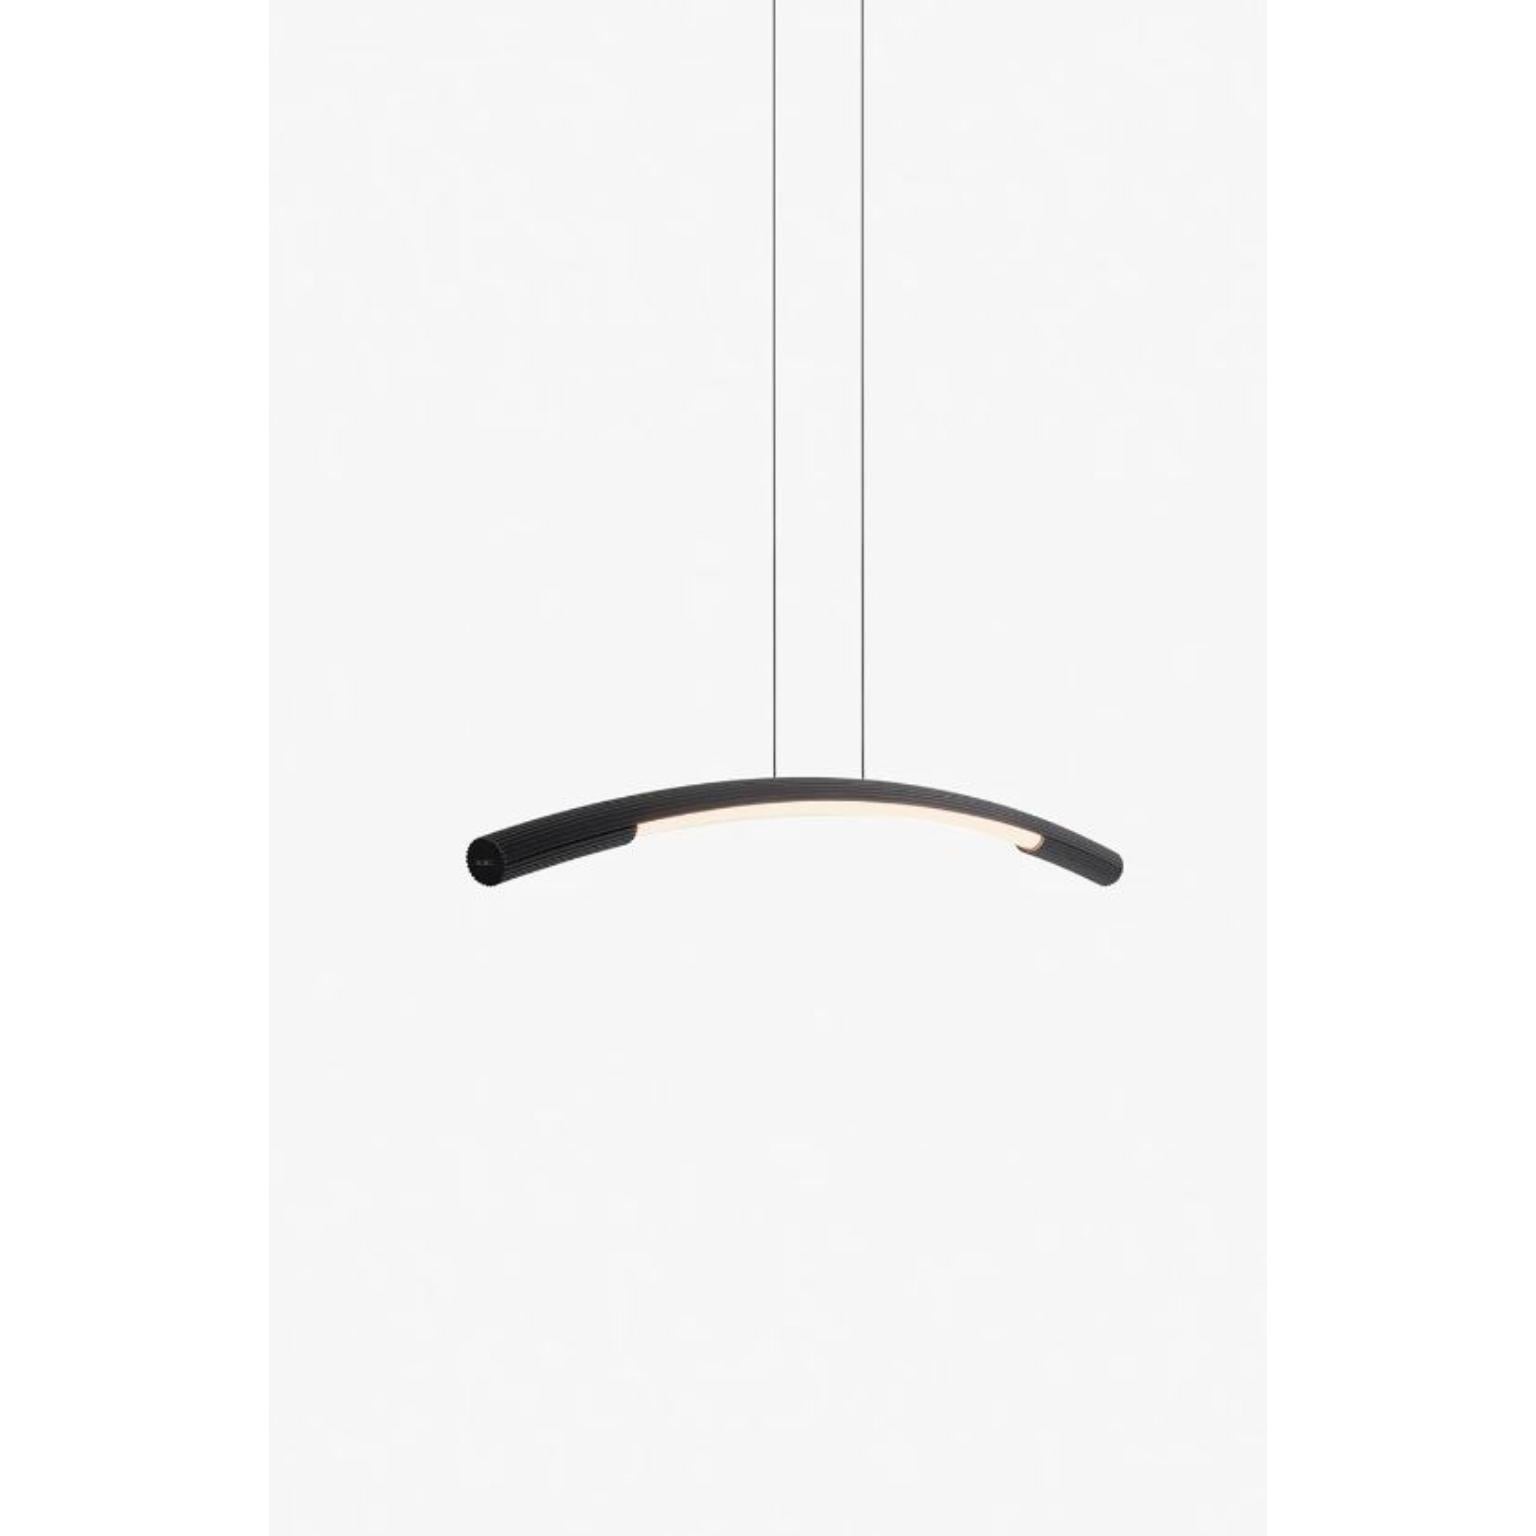 Small Black Palo Pendant Lamp by Wentz
Dimensions: D 5 x W 120 x H 13 cm
Materials: Aluminum, Acrylic.


WEIGHT: 2,7kg / 6 lbs
Colors: Black, Aluminum
LIGHT SOURCE: Built-in LED. 14W. 1680lm. 2700K. 90 CRI.
DIMMING No.
VOLTAGE: 100-240V
CABLE: 150cm